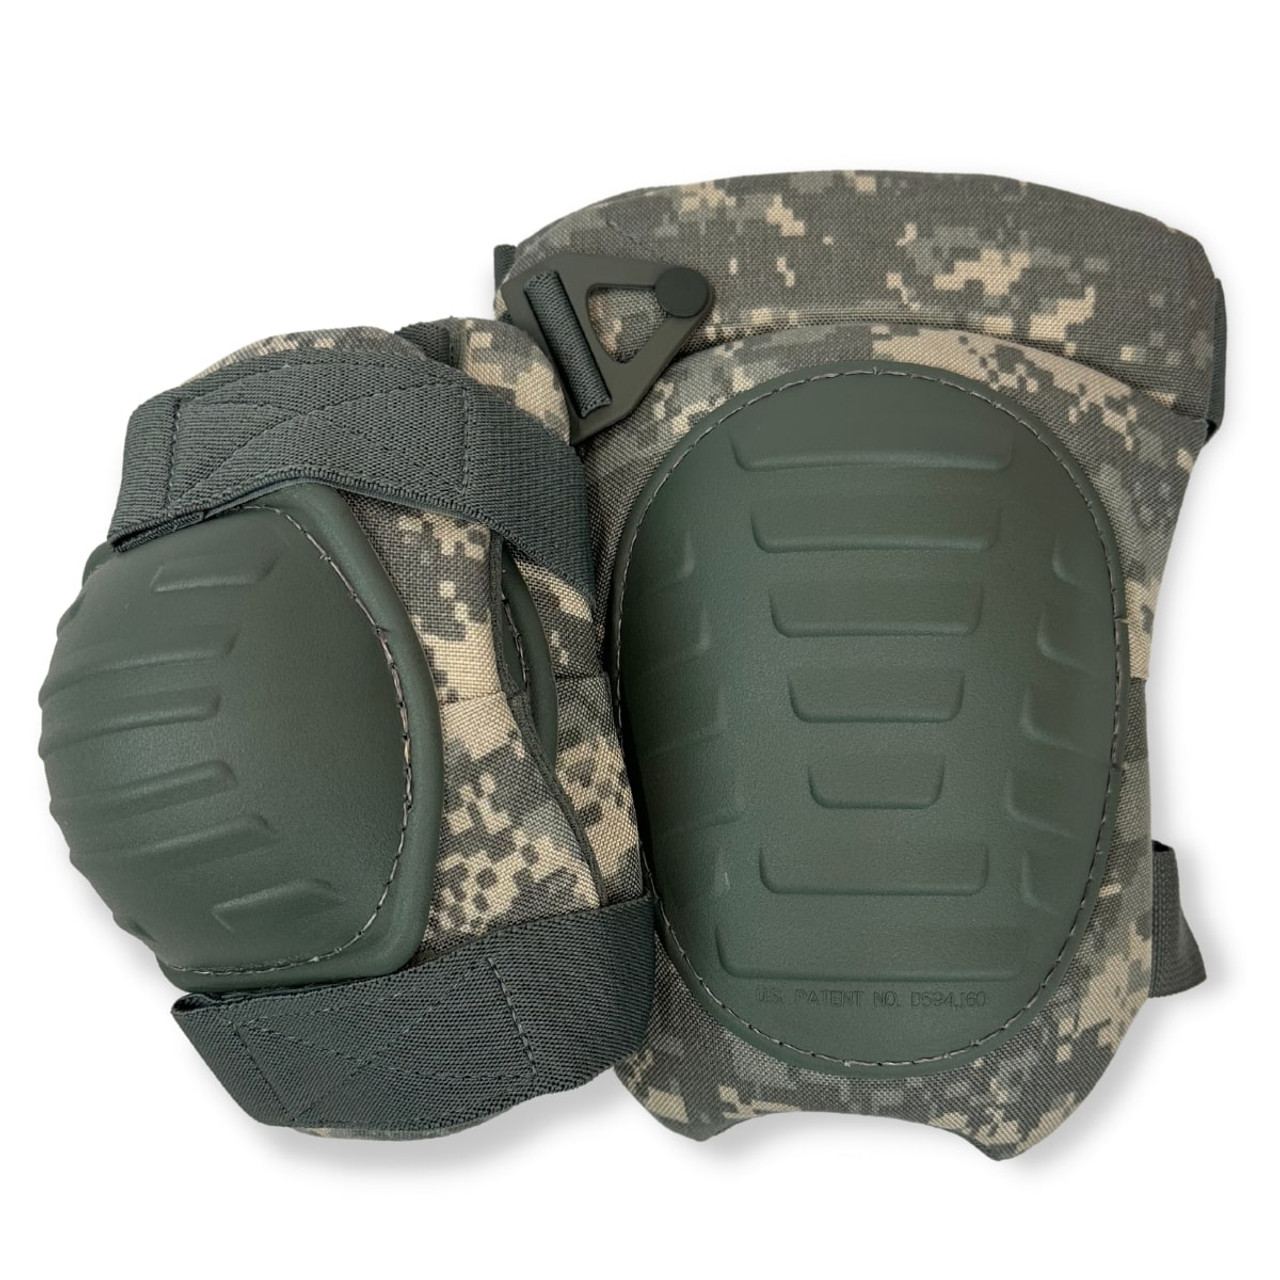 New and used Knee & Elbow Pads for sale